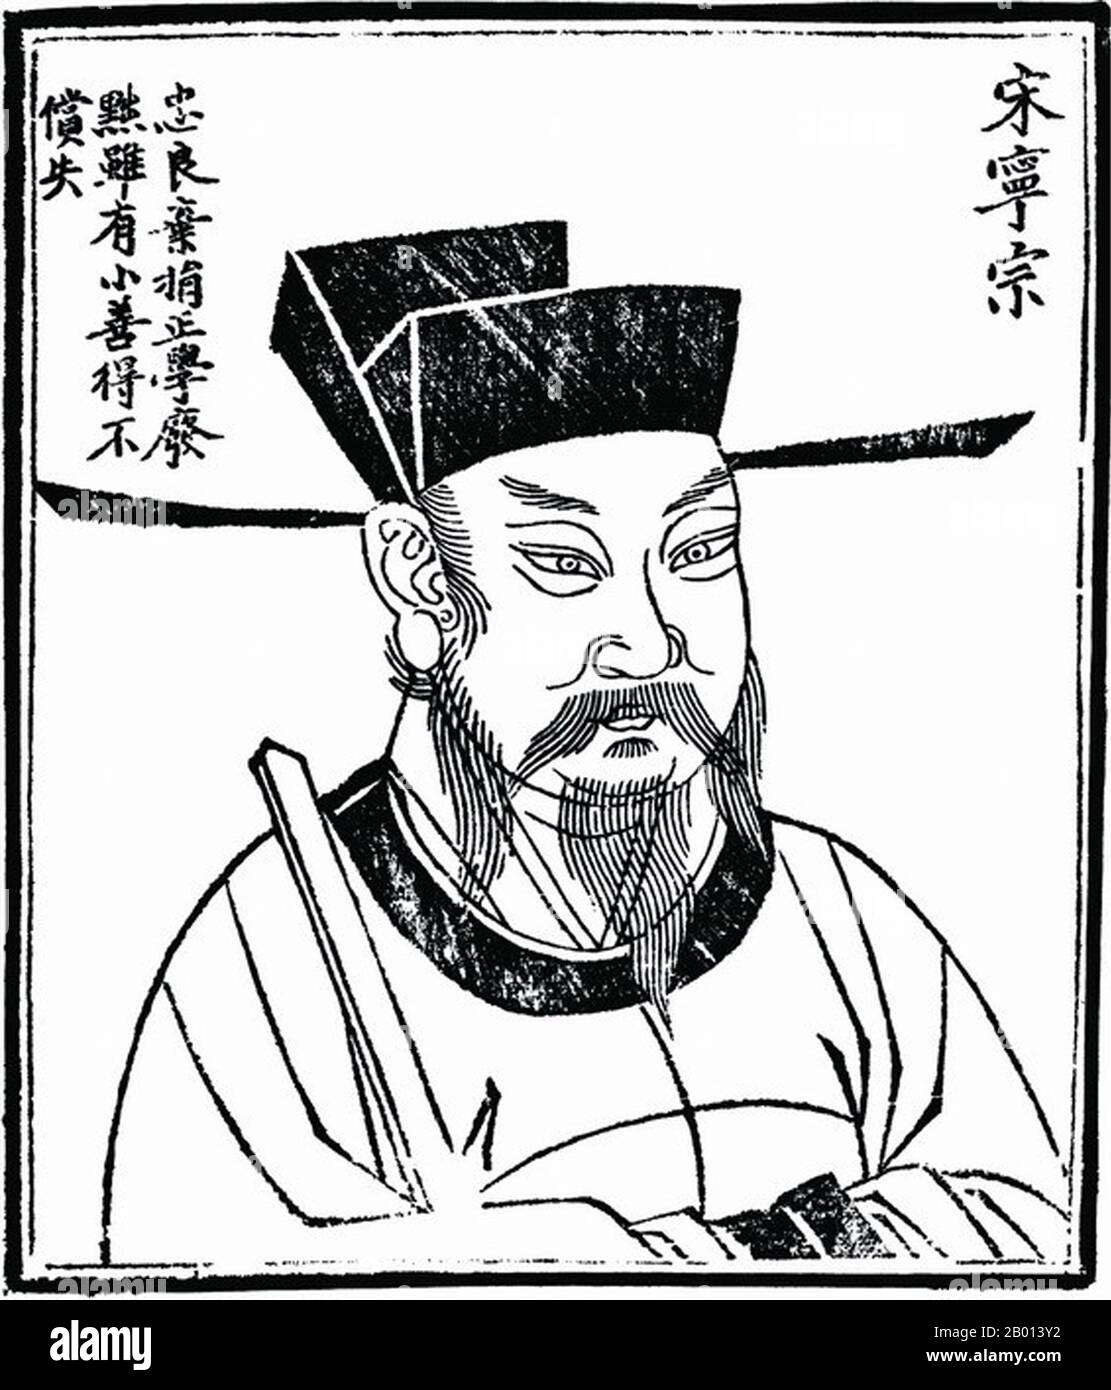 Emperor Ningzong (1168–1224) was the 13th emperor of the Song dynasty who reigned from 1194 to 1224. His reign was noted for its cultural and intellectual achievements. In particular, Zhu Xi wrote some of his most famous works during this period. On the political side however, Emperor Ningzong saw his government being plagued by rising inflation that threatened the economy and the military advances by the Jurchen people from the north. In 1279, Kubilai Khan established the Yuan dynasty, an empire that would in less than sixty years after Ningzong's death eliminate the whole of Southern Song dy Stock Photo